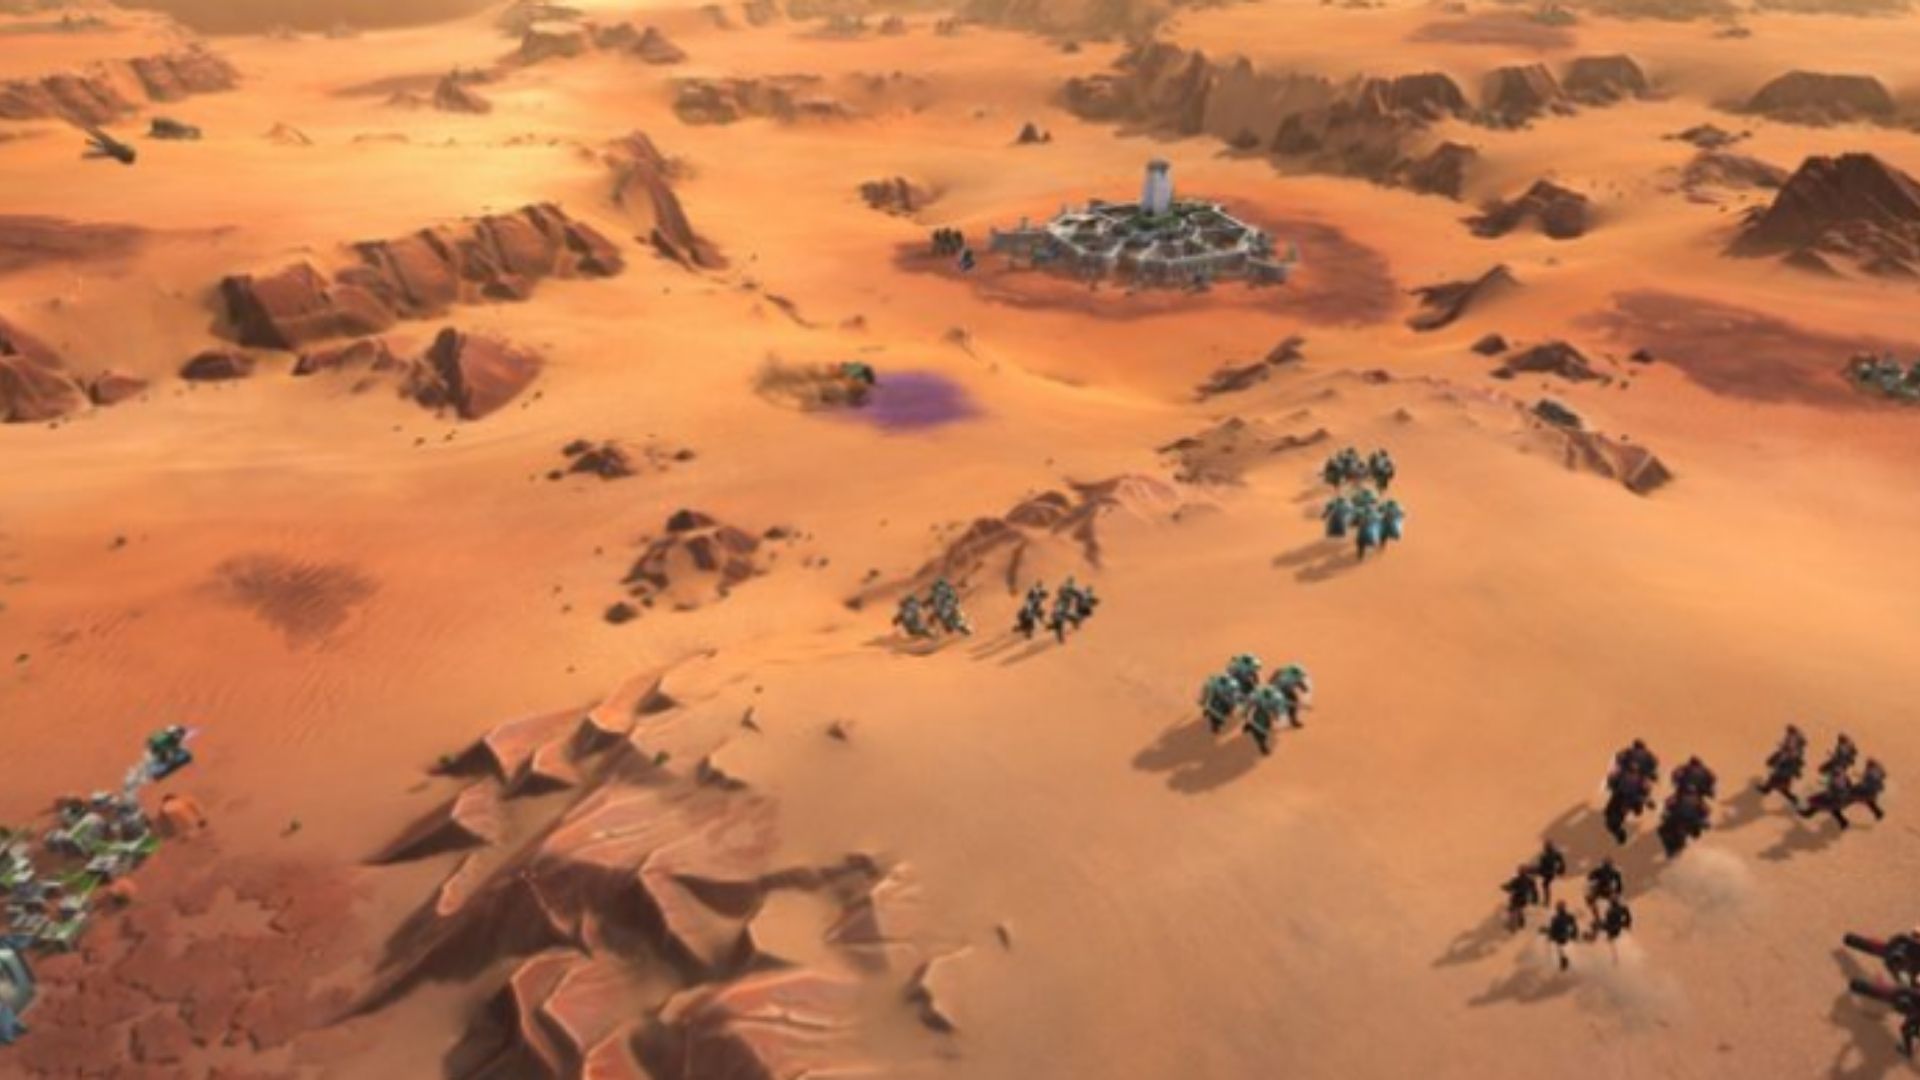 Dune Spice Wars roadmap incorporates both co-op and PvP multiplayer